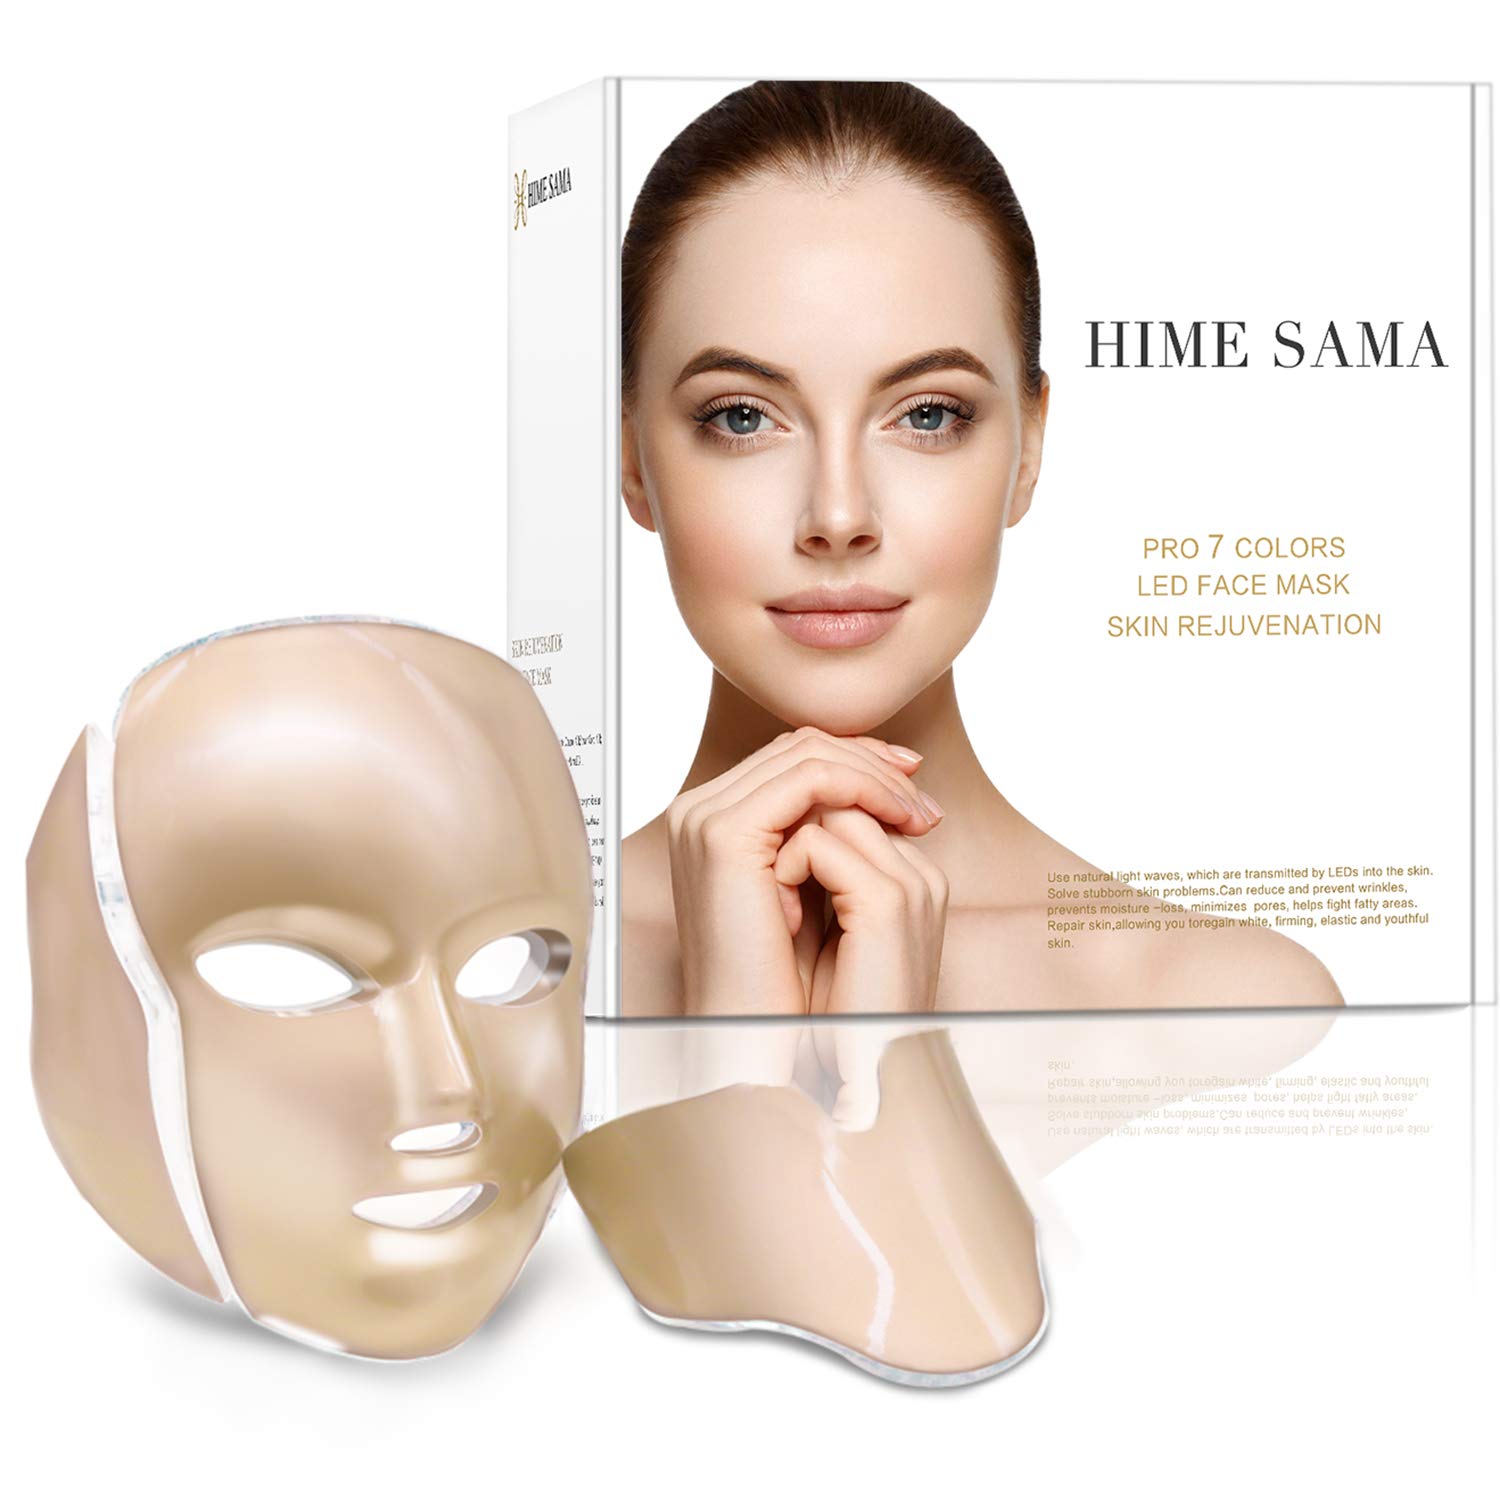 HIME SAMA Led Skin Mask, Pro 7 Color LED Face Mask Light Therapy for Face and Neck, Facial Care Mask & Optical Cosmetic Mask Portable for Home and Travel Use - image 1 of 6